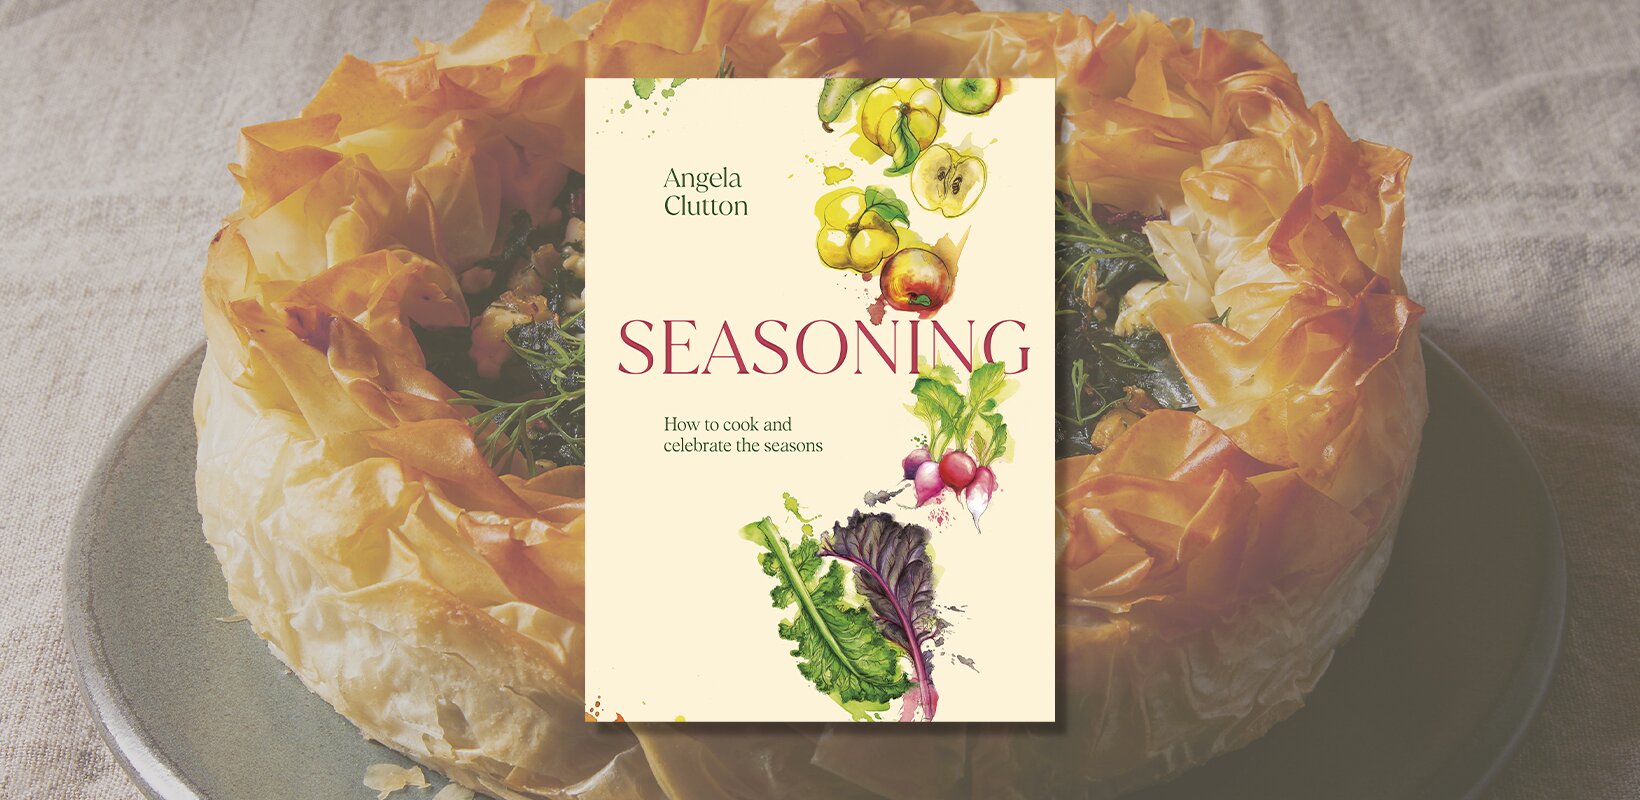 Book review: Seasoning by Angela Clutton